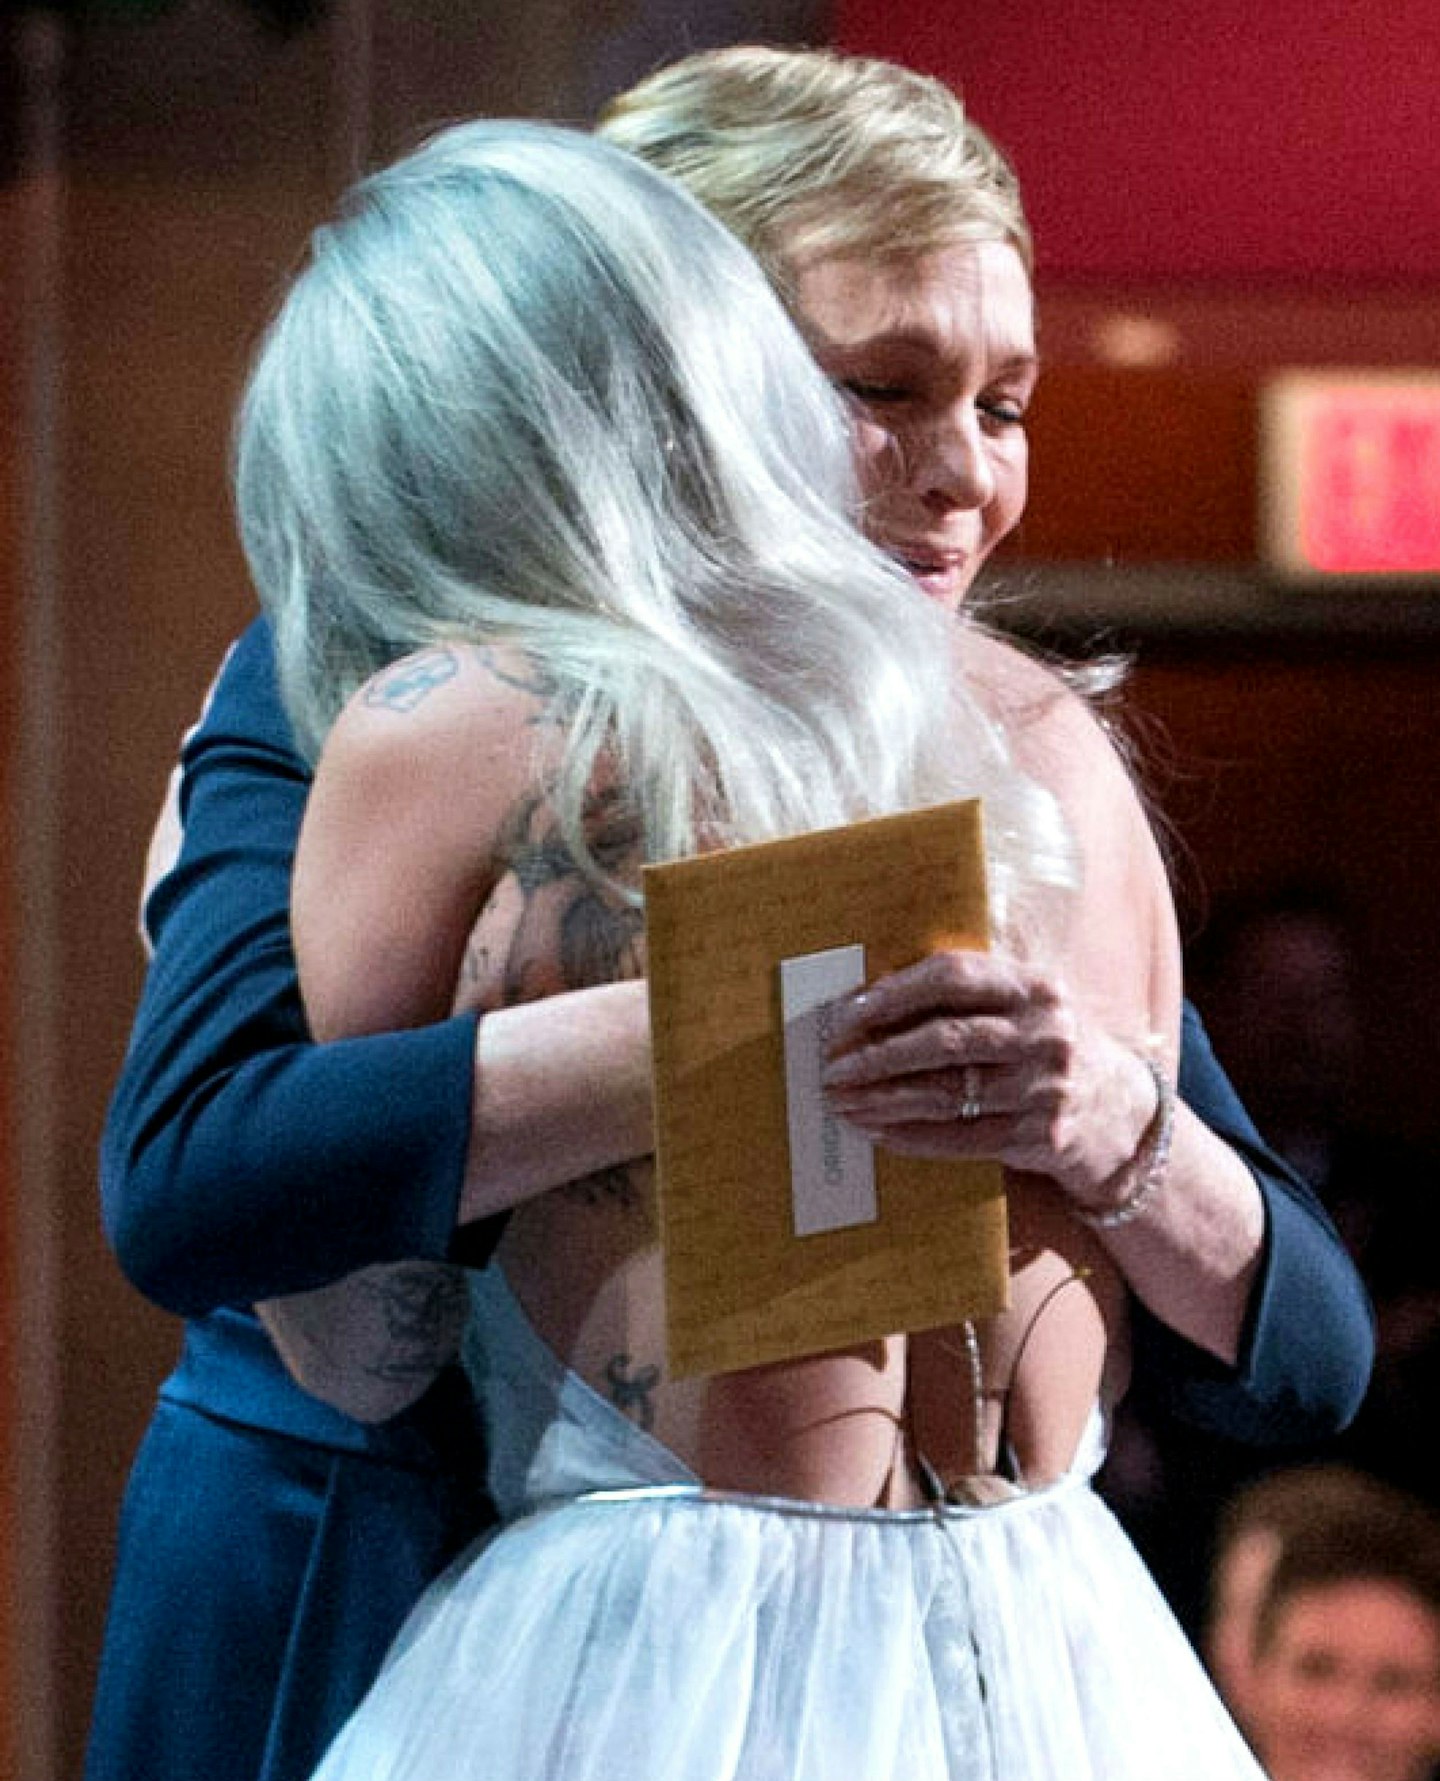 Gaga was joined on stage by Julie Andrews